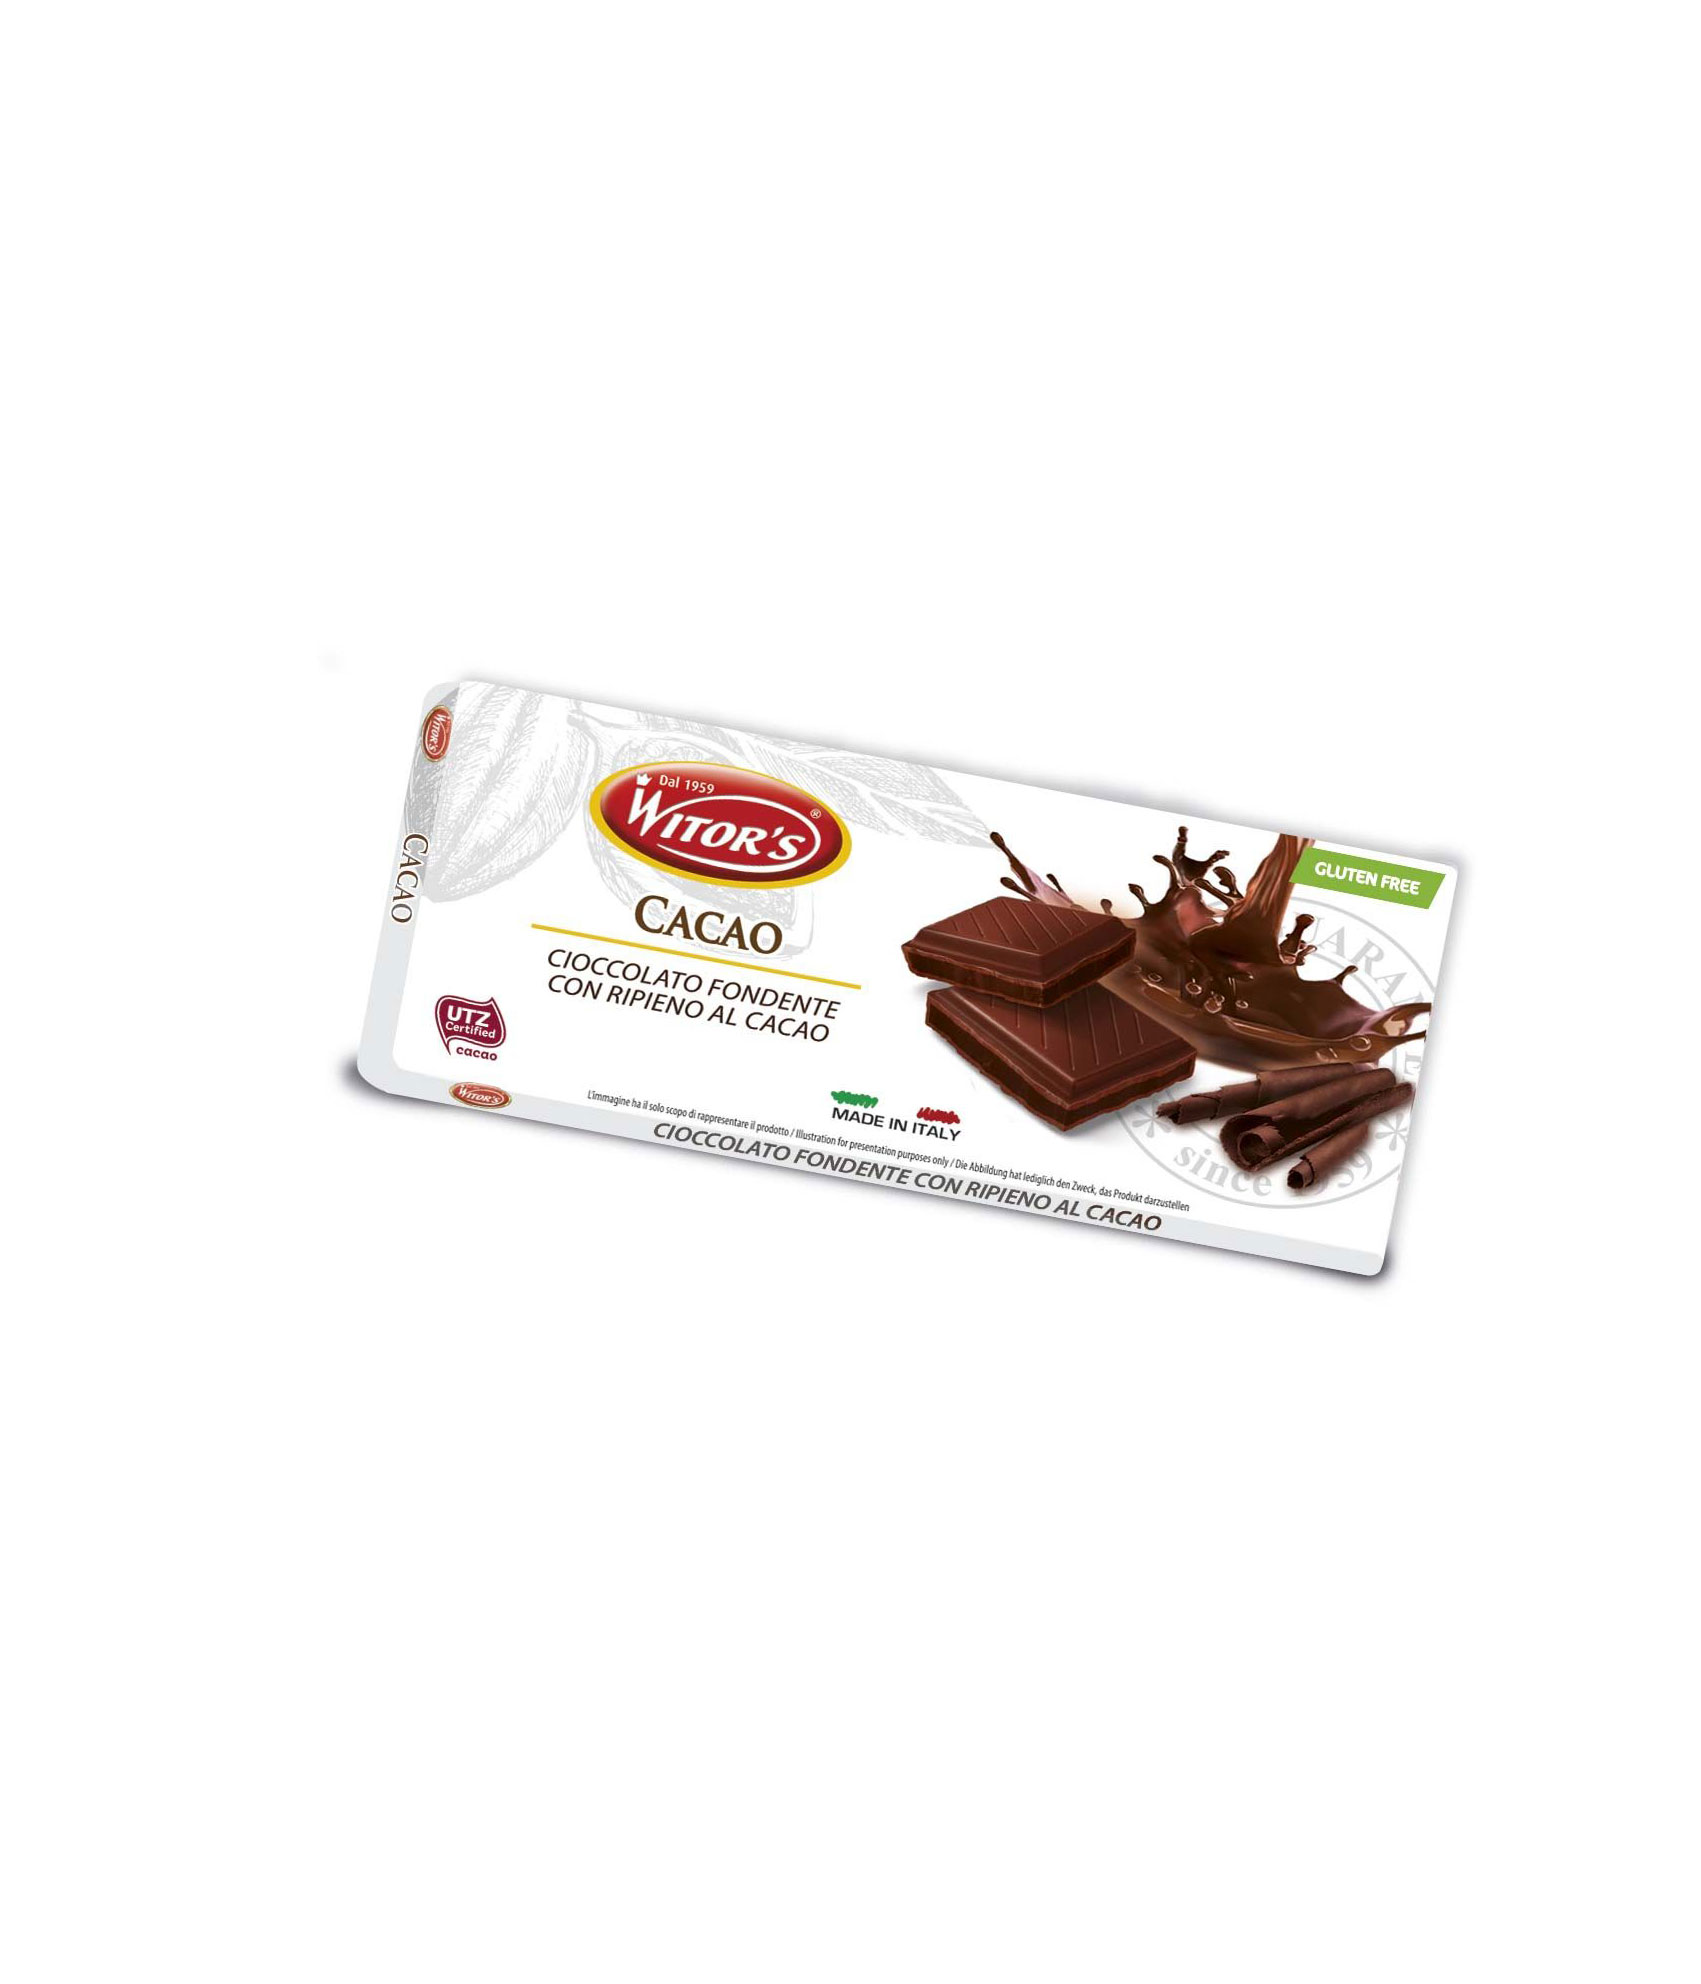 Witor’s chocolate Bar Filled With Cocoa Cream